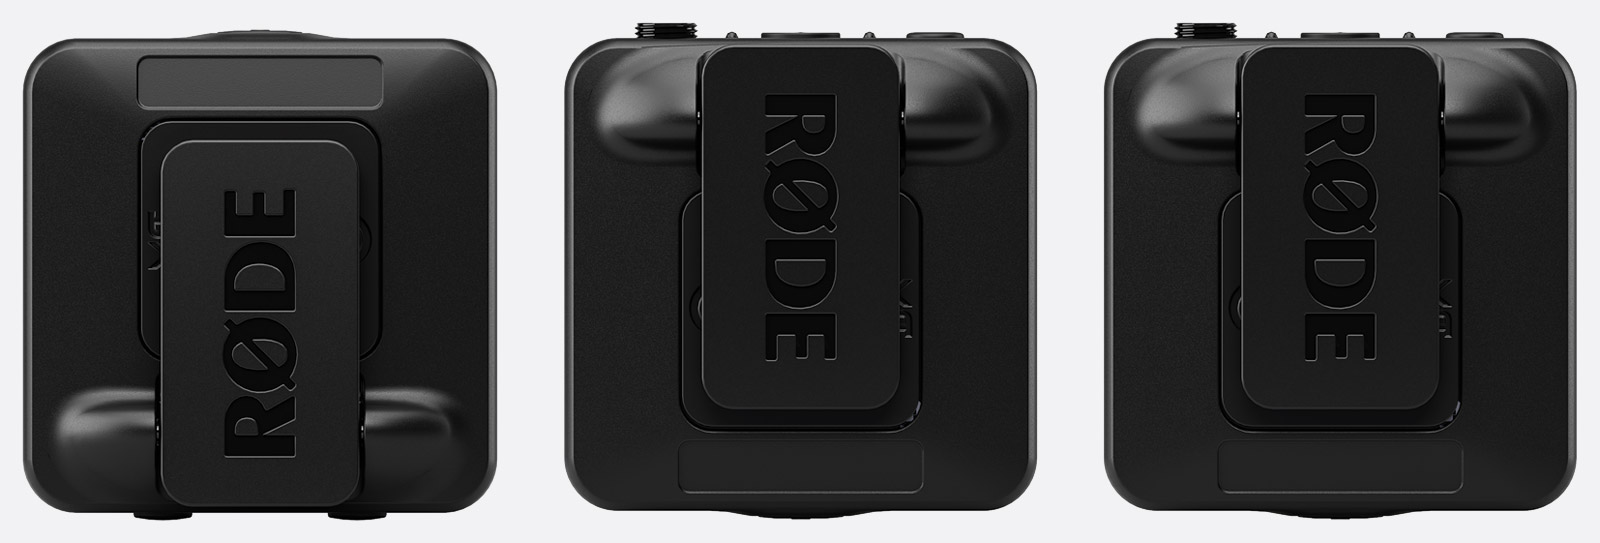 RODE WIRELESS PRO RADIOMIC SYSTEM Dual transmitters, clip-on, 32-bit float  recording, 2.4GHz, black